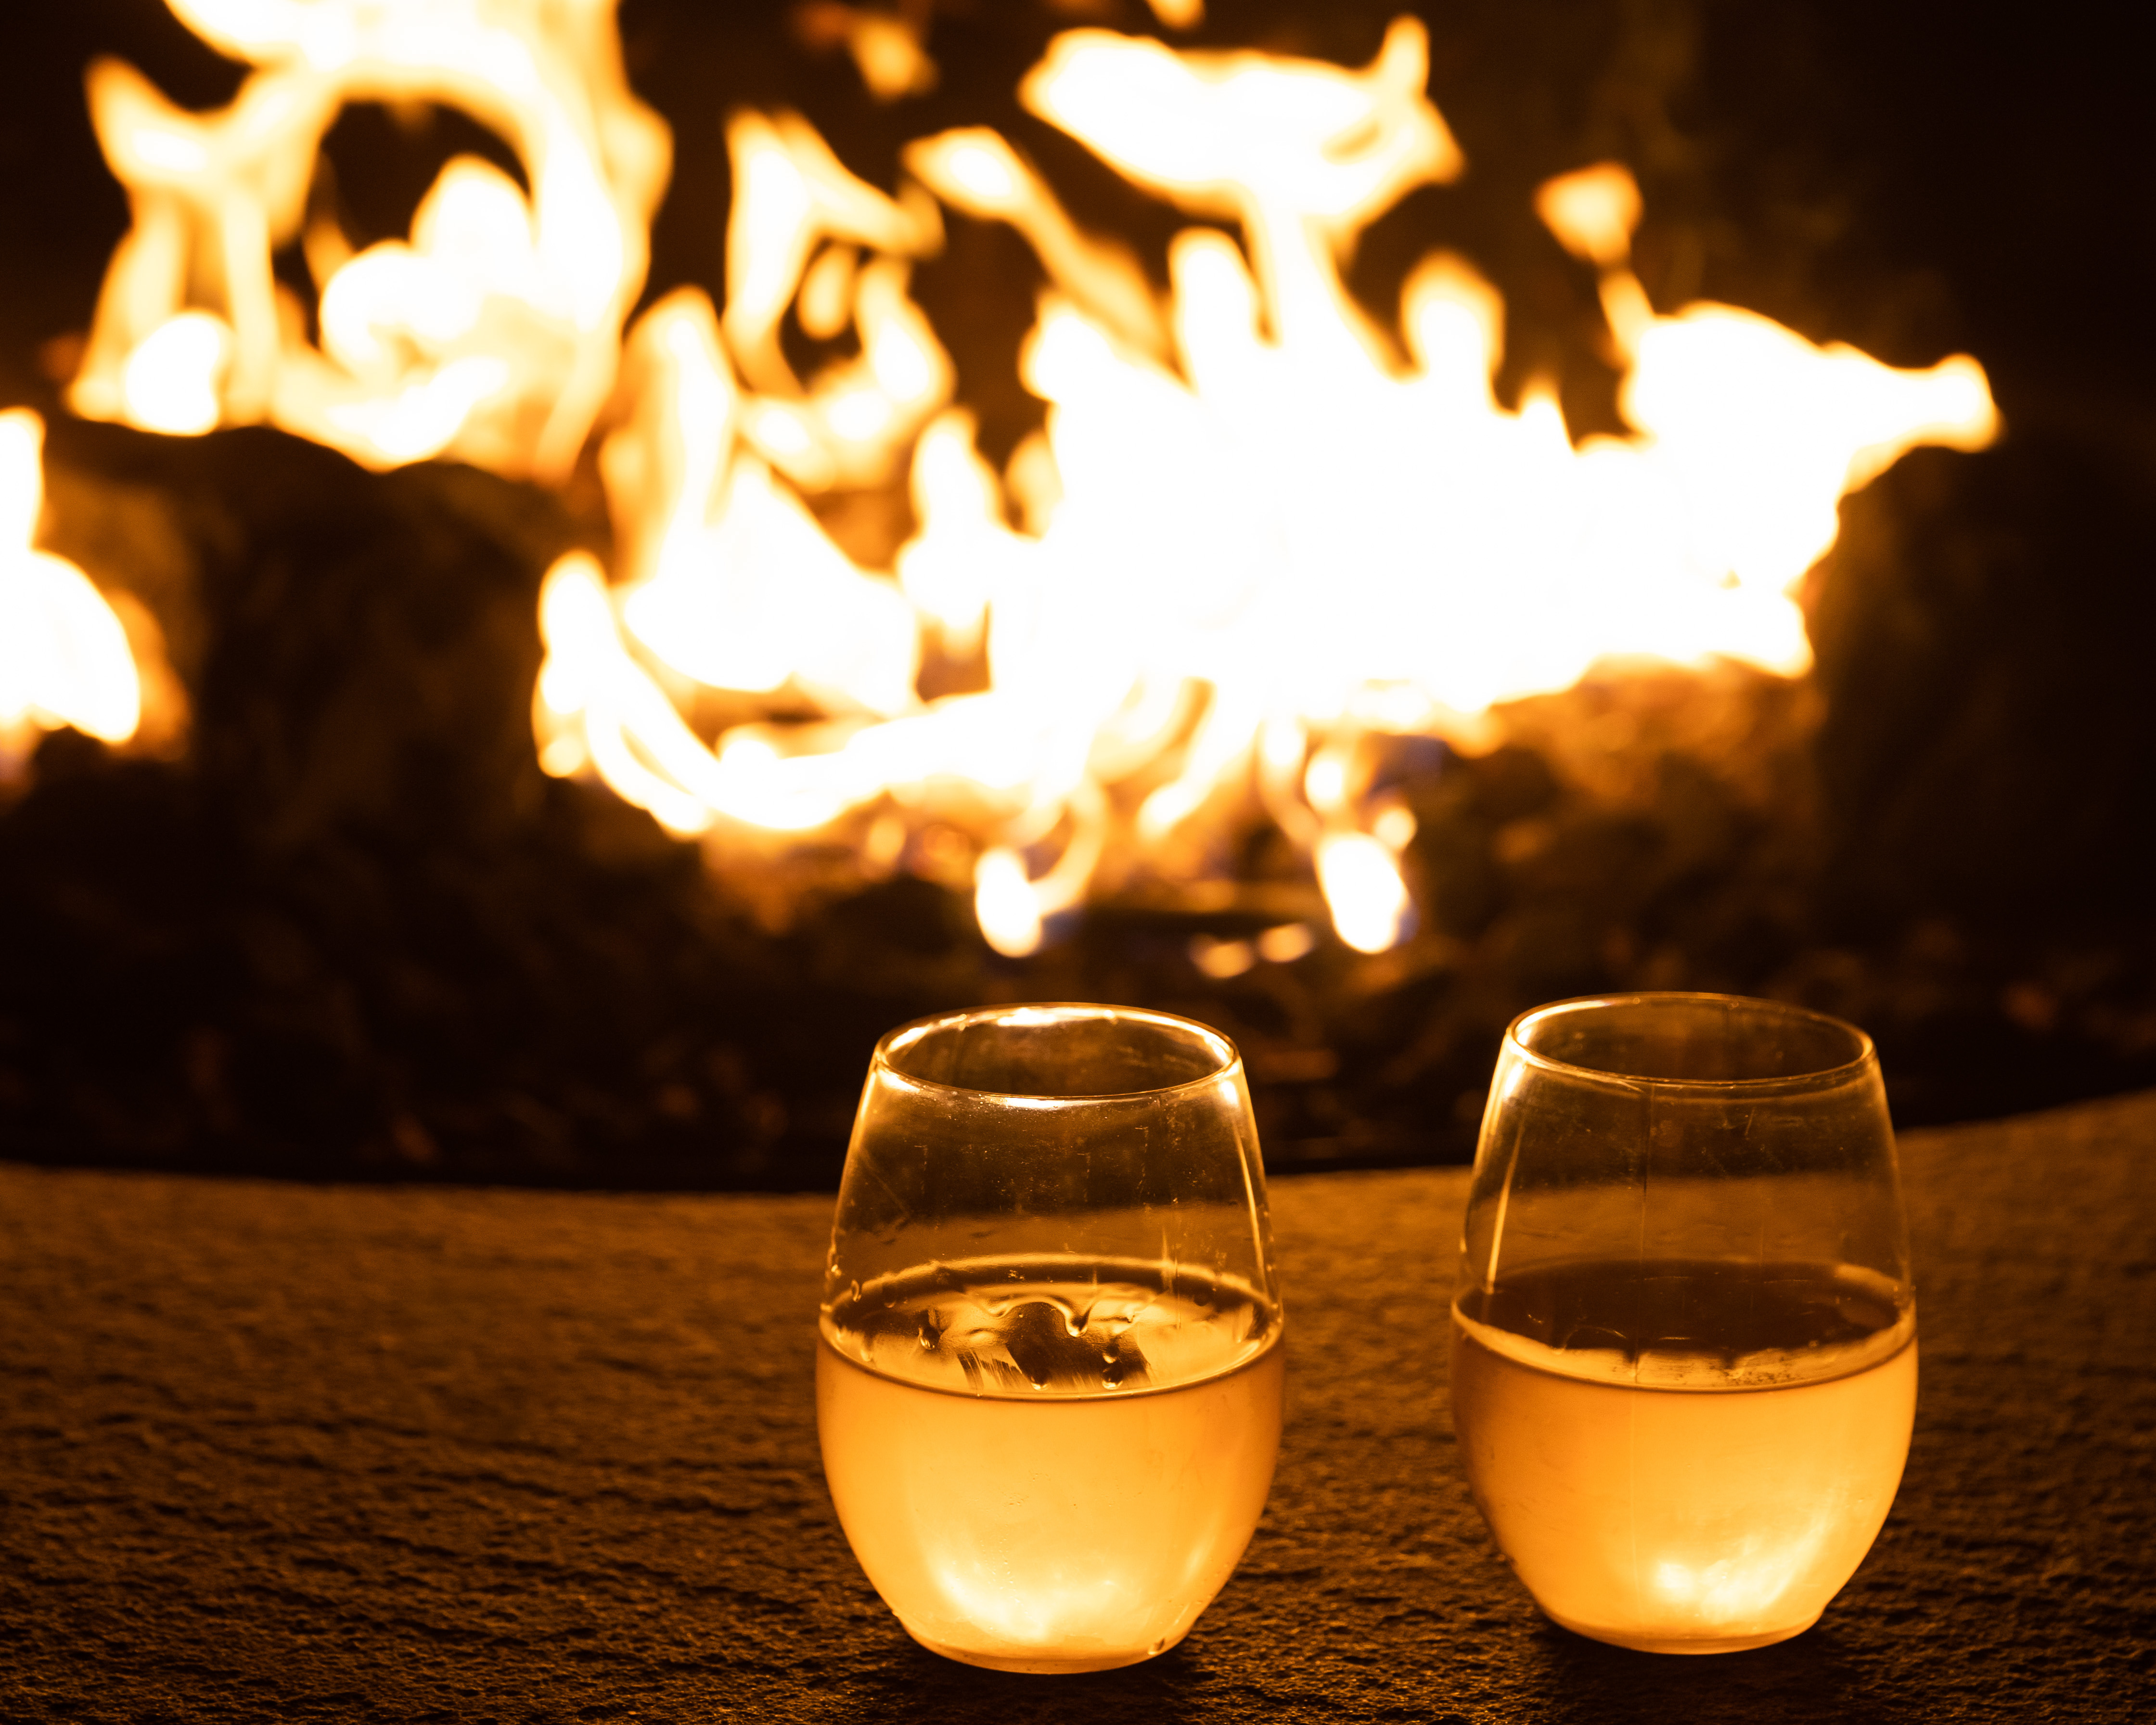 Two glasses of wine in front of fire pit at night.